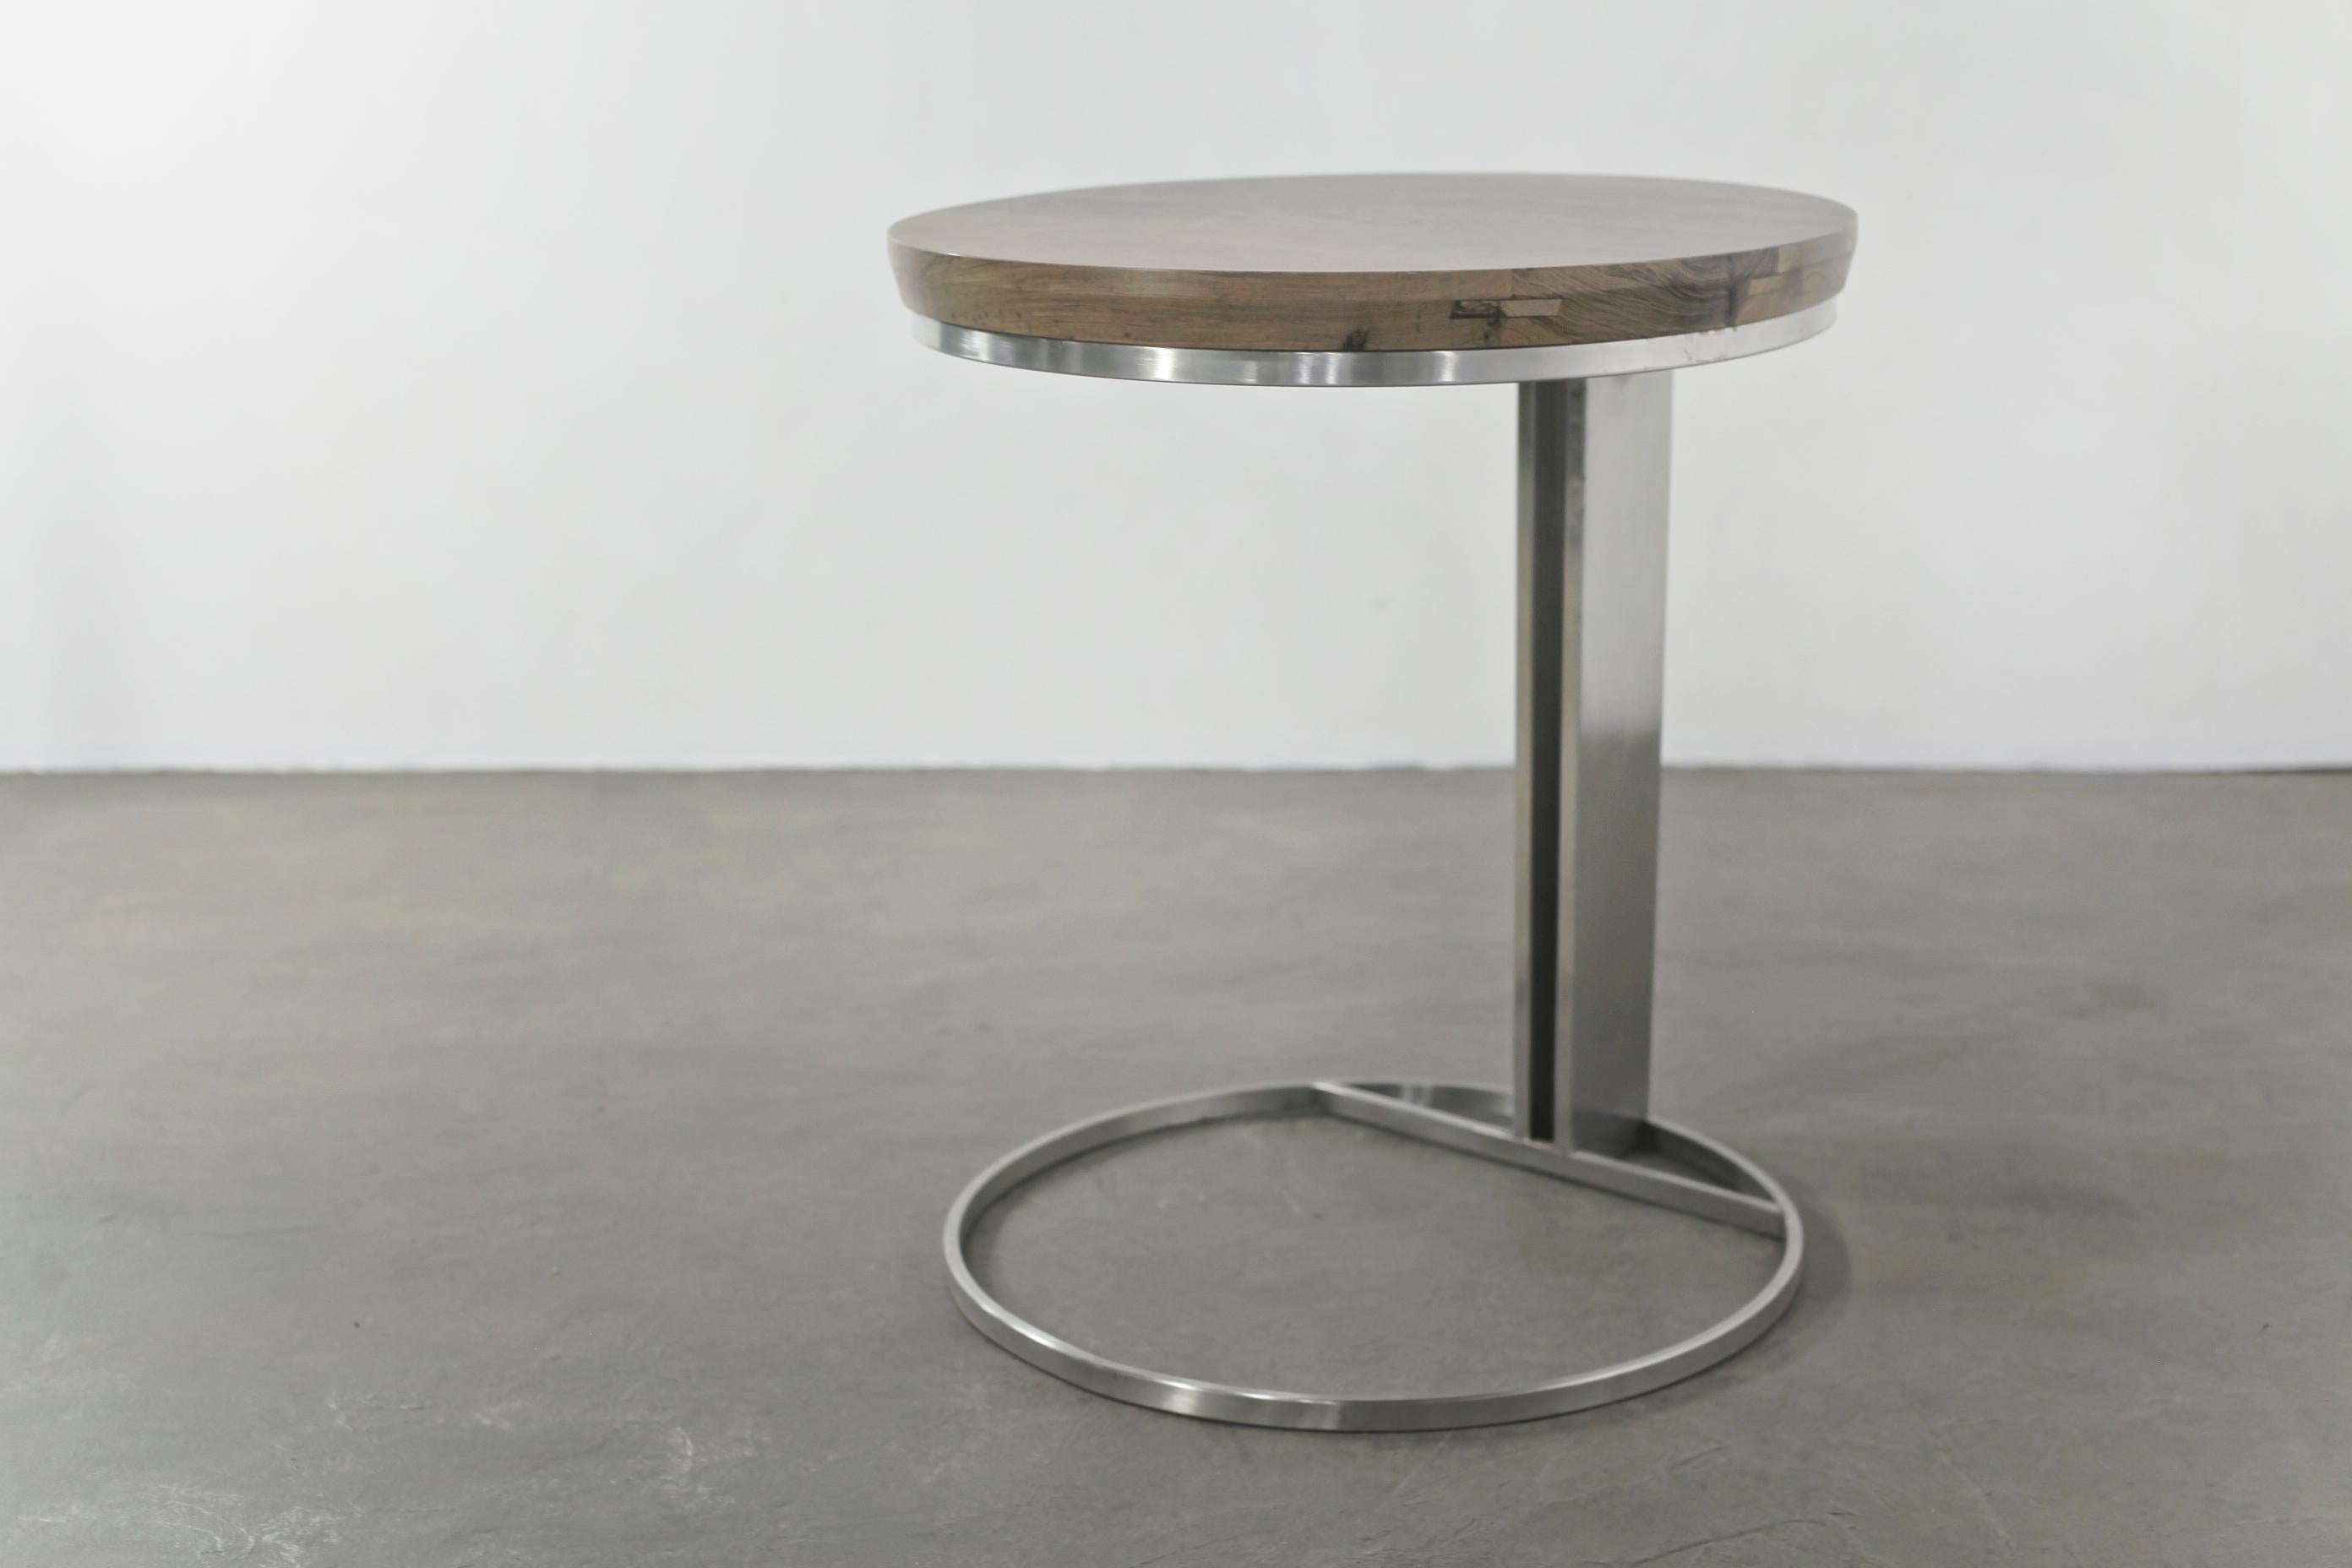 Original Prototype of the Trillo Modern Side Table by Costantini Design - In Stock 

24